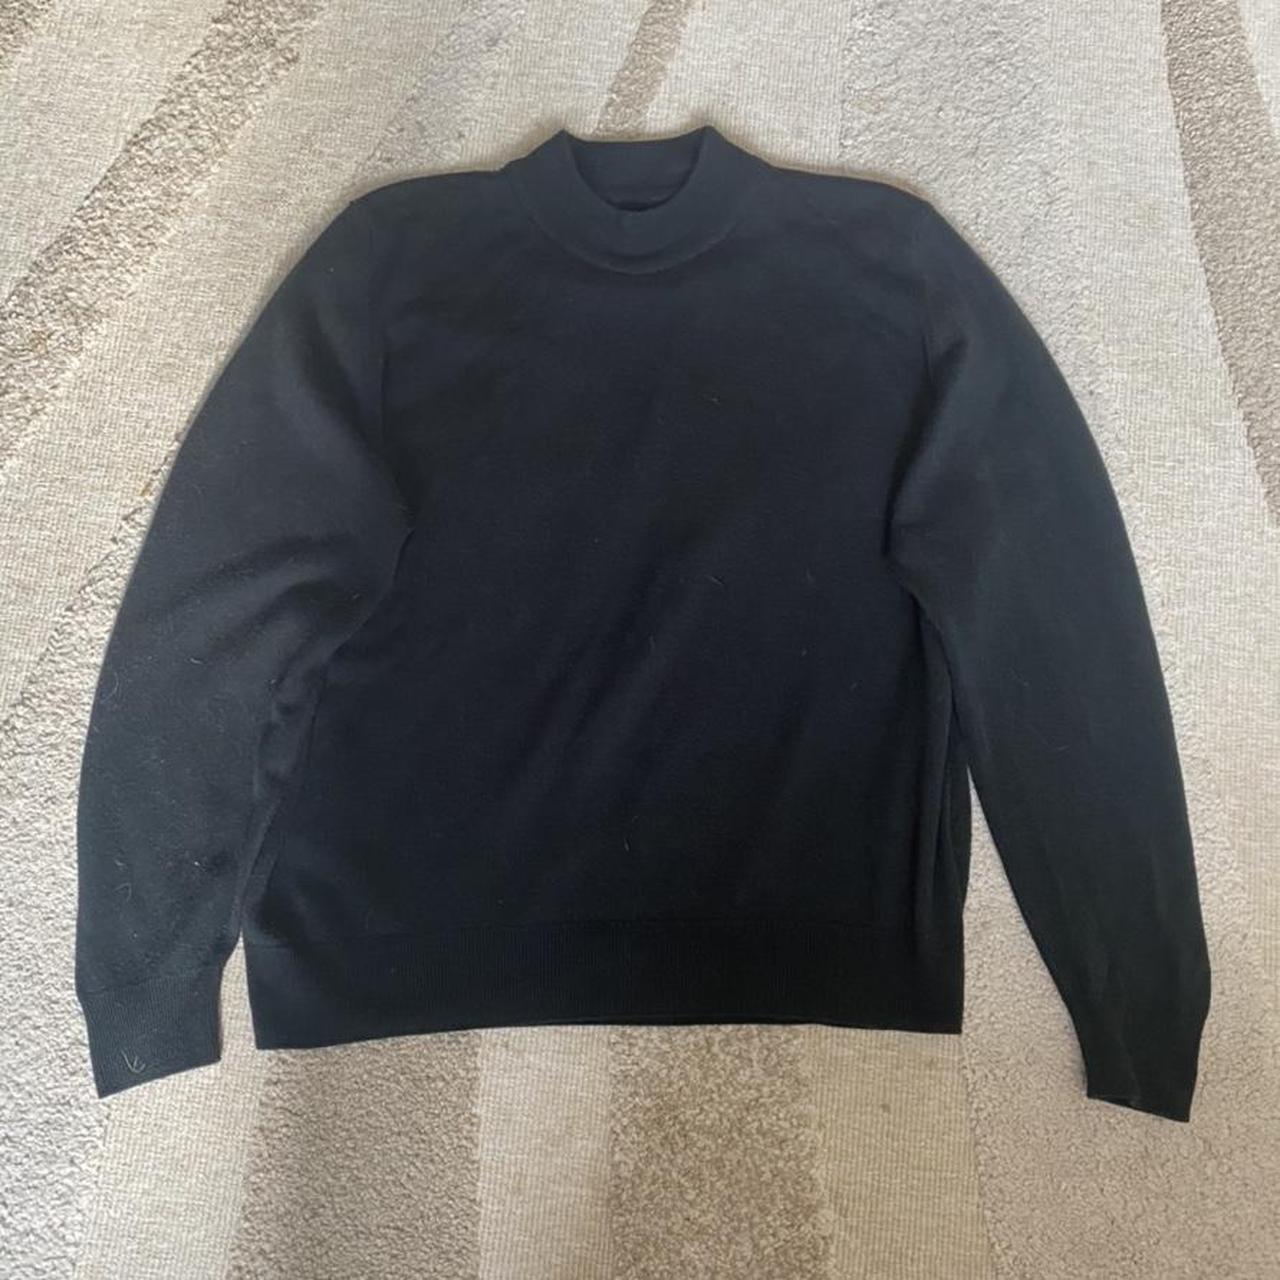 Black jumper - states size 18 but would fit as a... - Depop